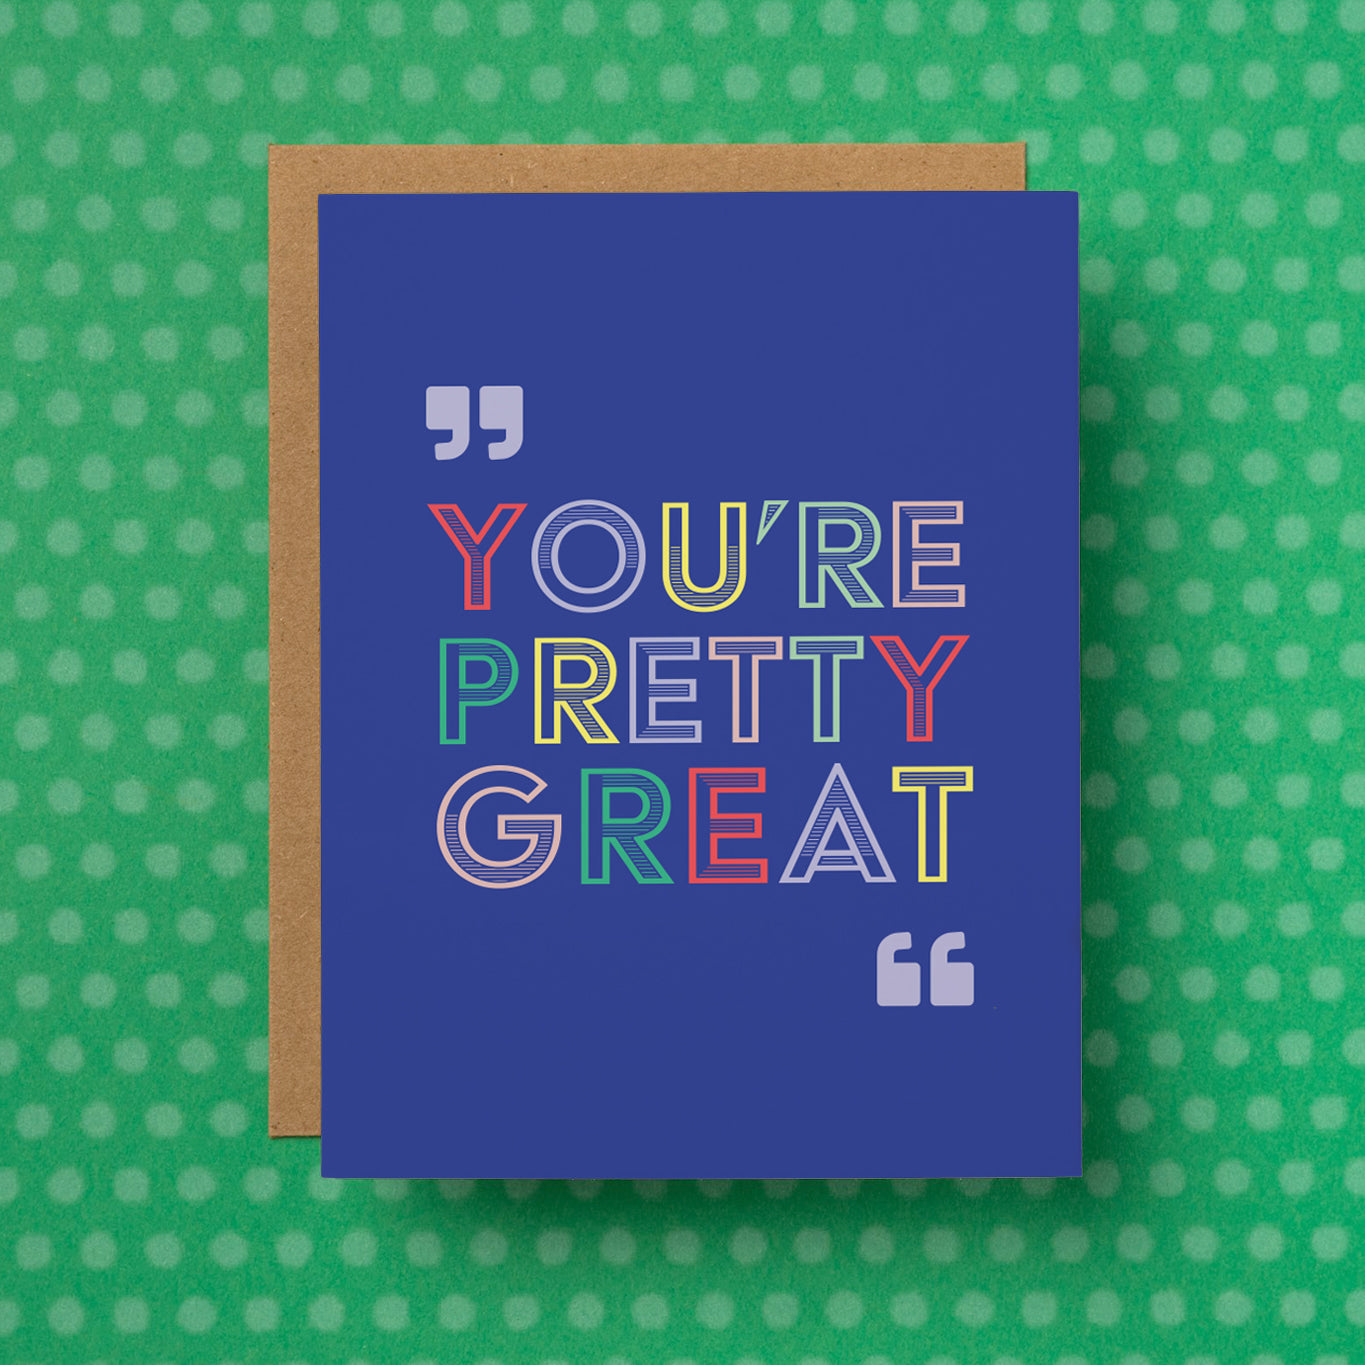 A funny and sarcastic greeting card for friends that reads "You're pretty great."